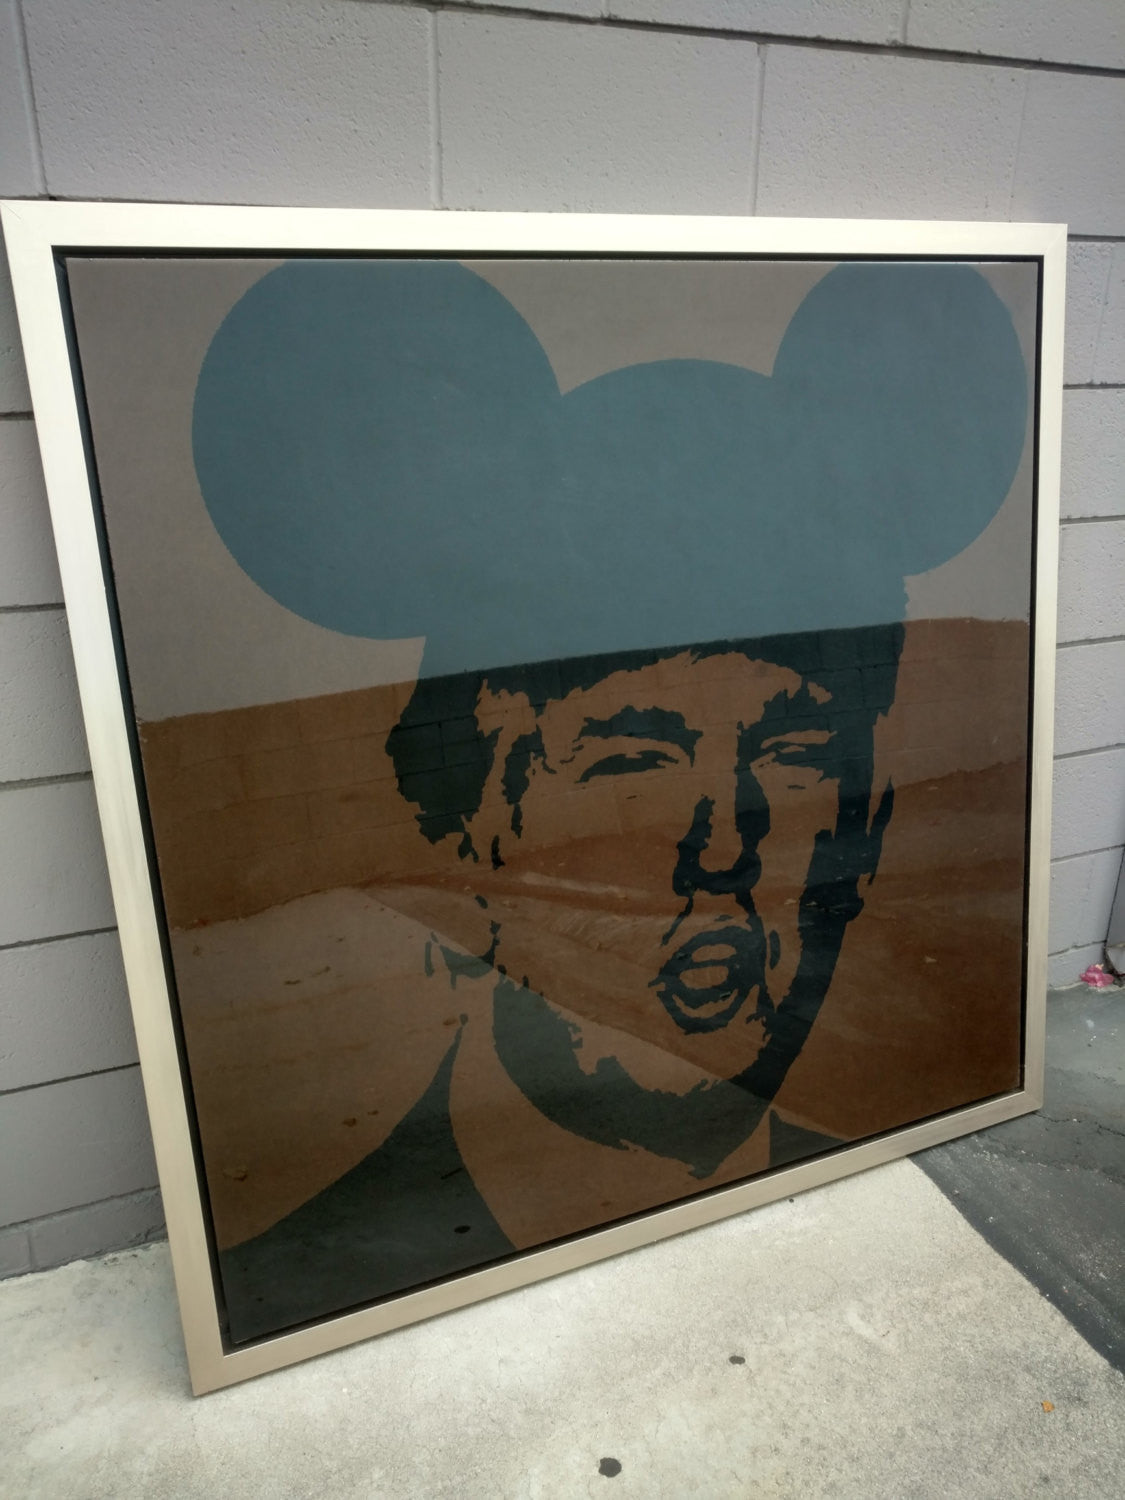 SOLD - 48x48 Original Artwork "Operation Mickey Mouse" featuring Trump - Politically Incorrect